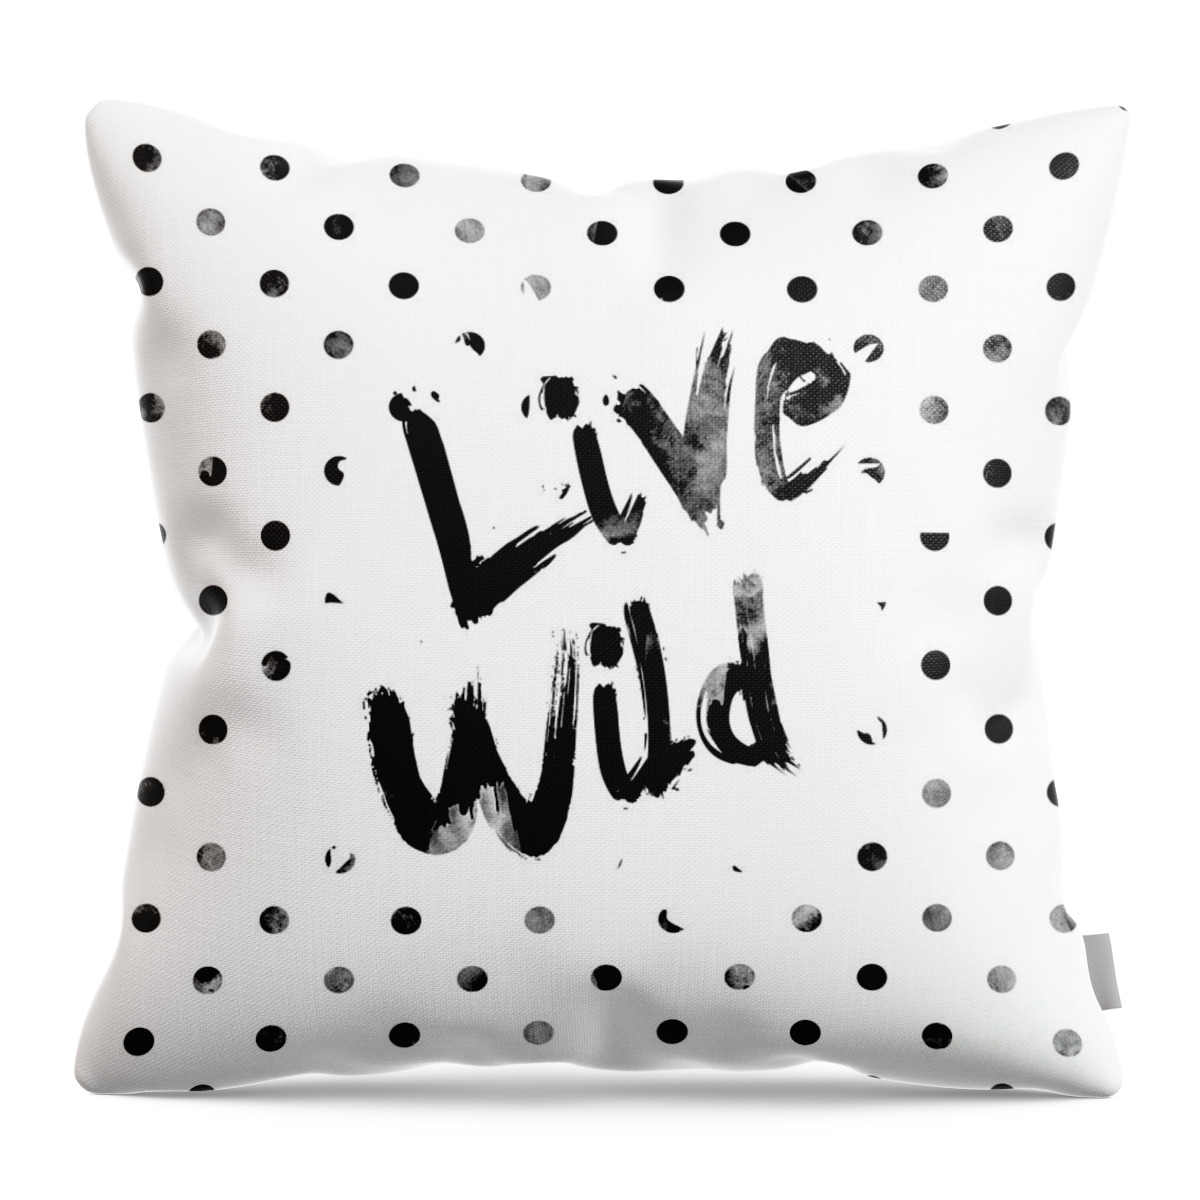 Live Wild Throw Pillow featuring the digital art Live Wild by Pati Photography